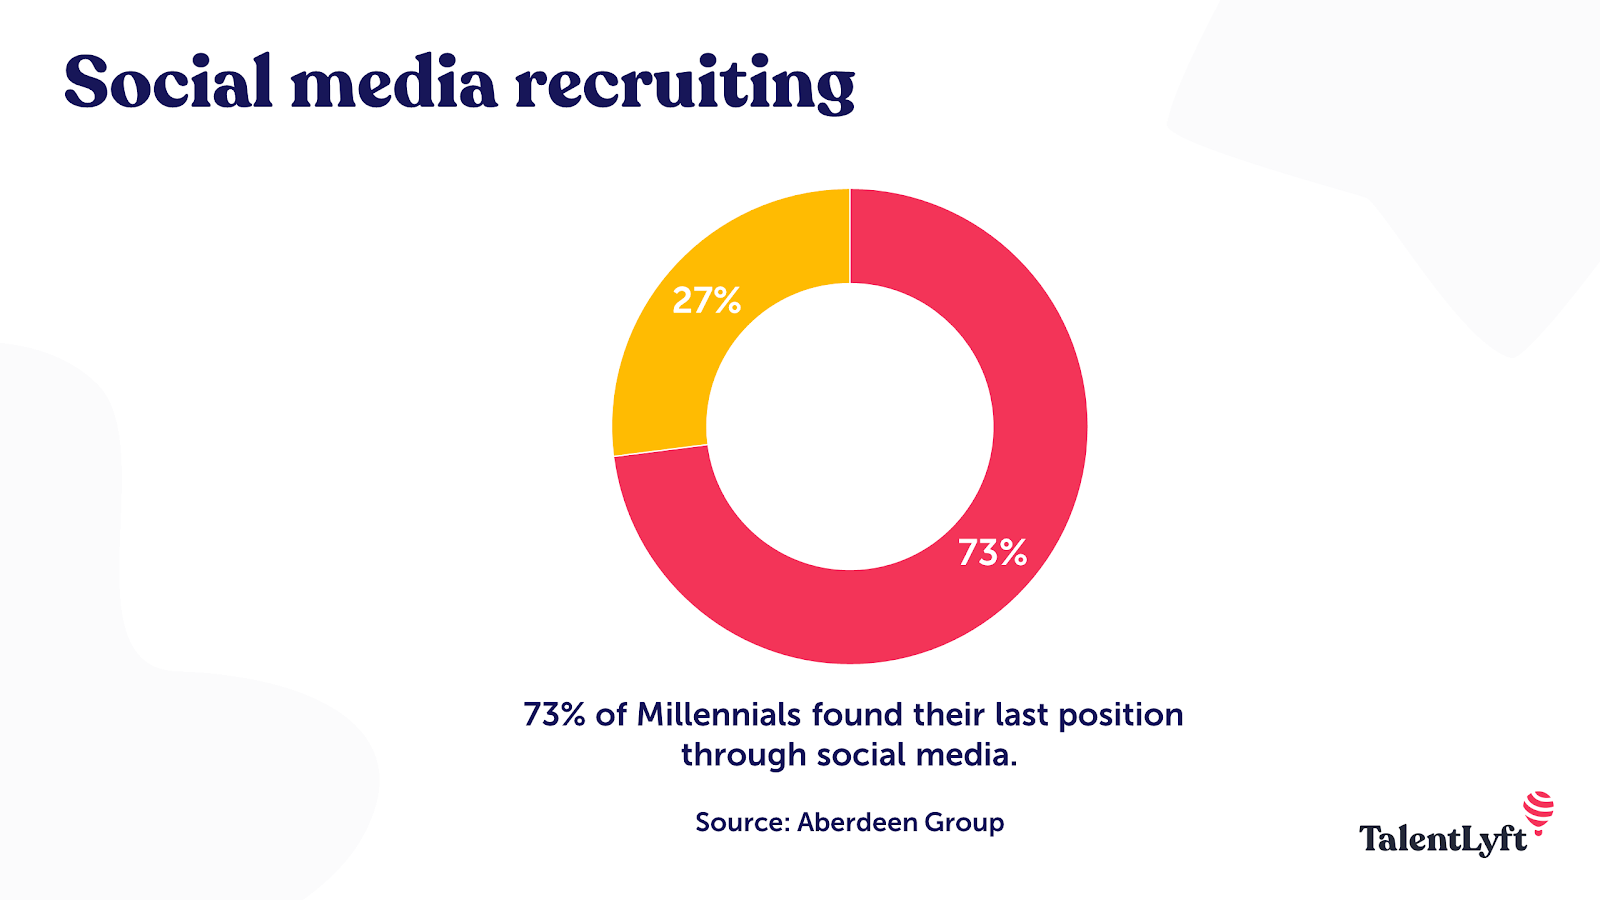 Social media recruiting the best way to attract Millennials